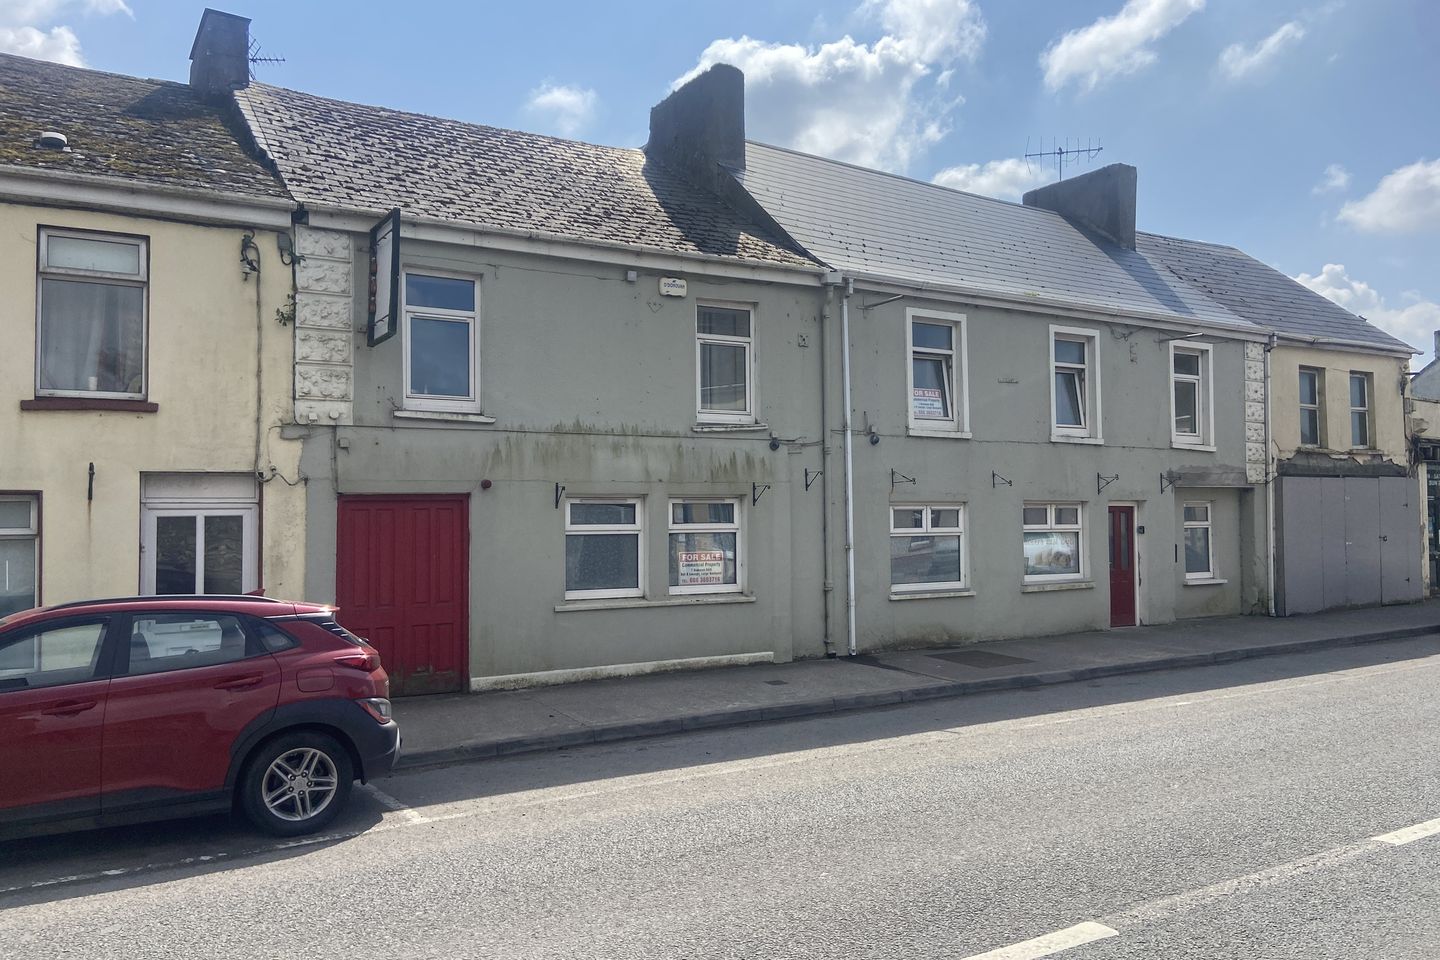 ROVERS REST, Rovers Rest, Rathcormac, Co. Cork, P61TW84